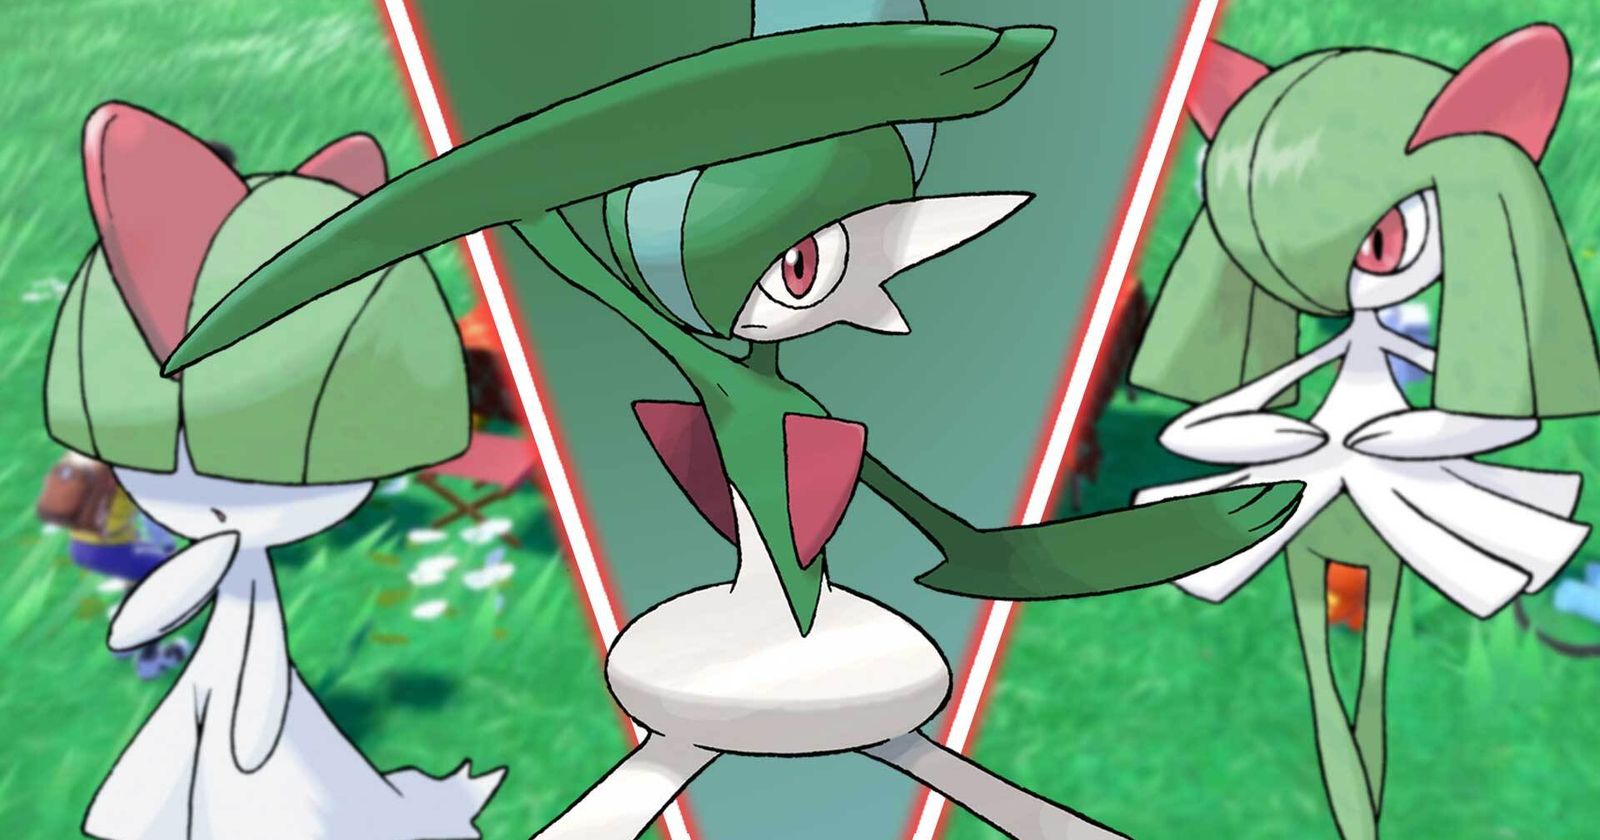 Pokemon Scarlet and Violet  Gallade - Location, Stats, Best